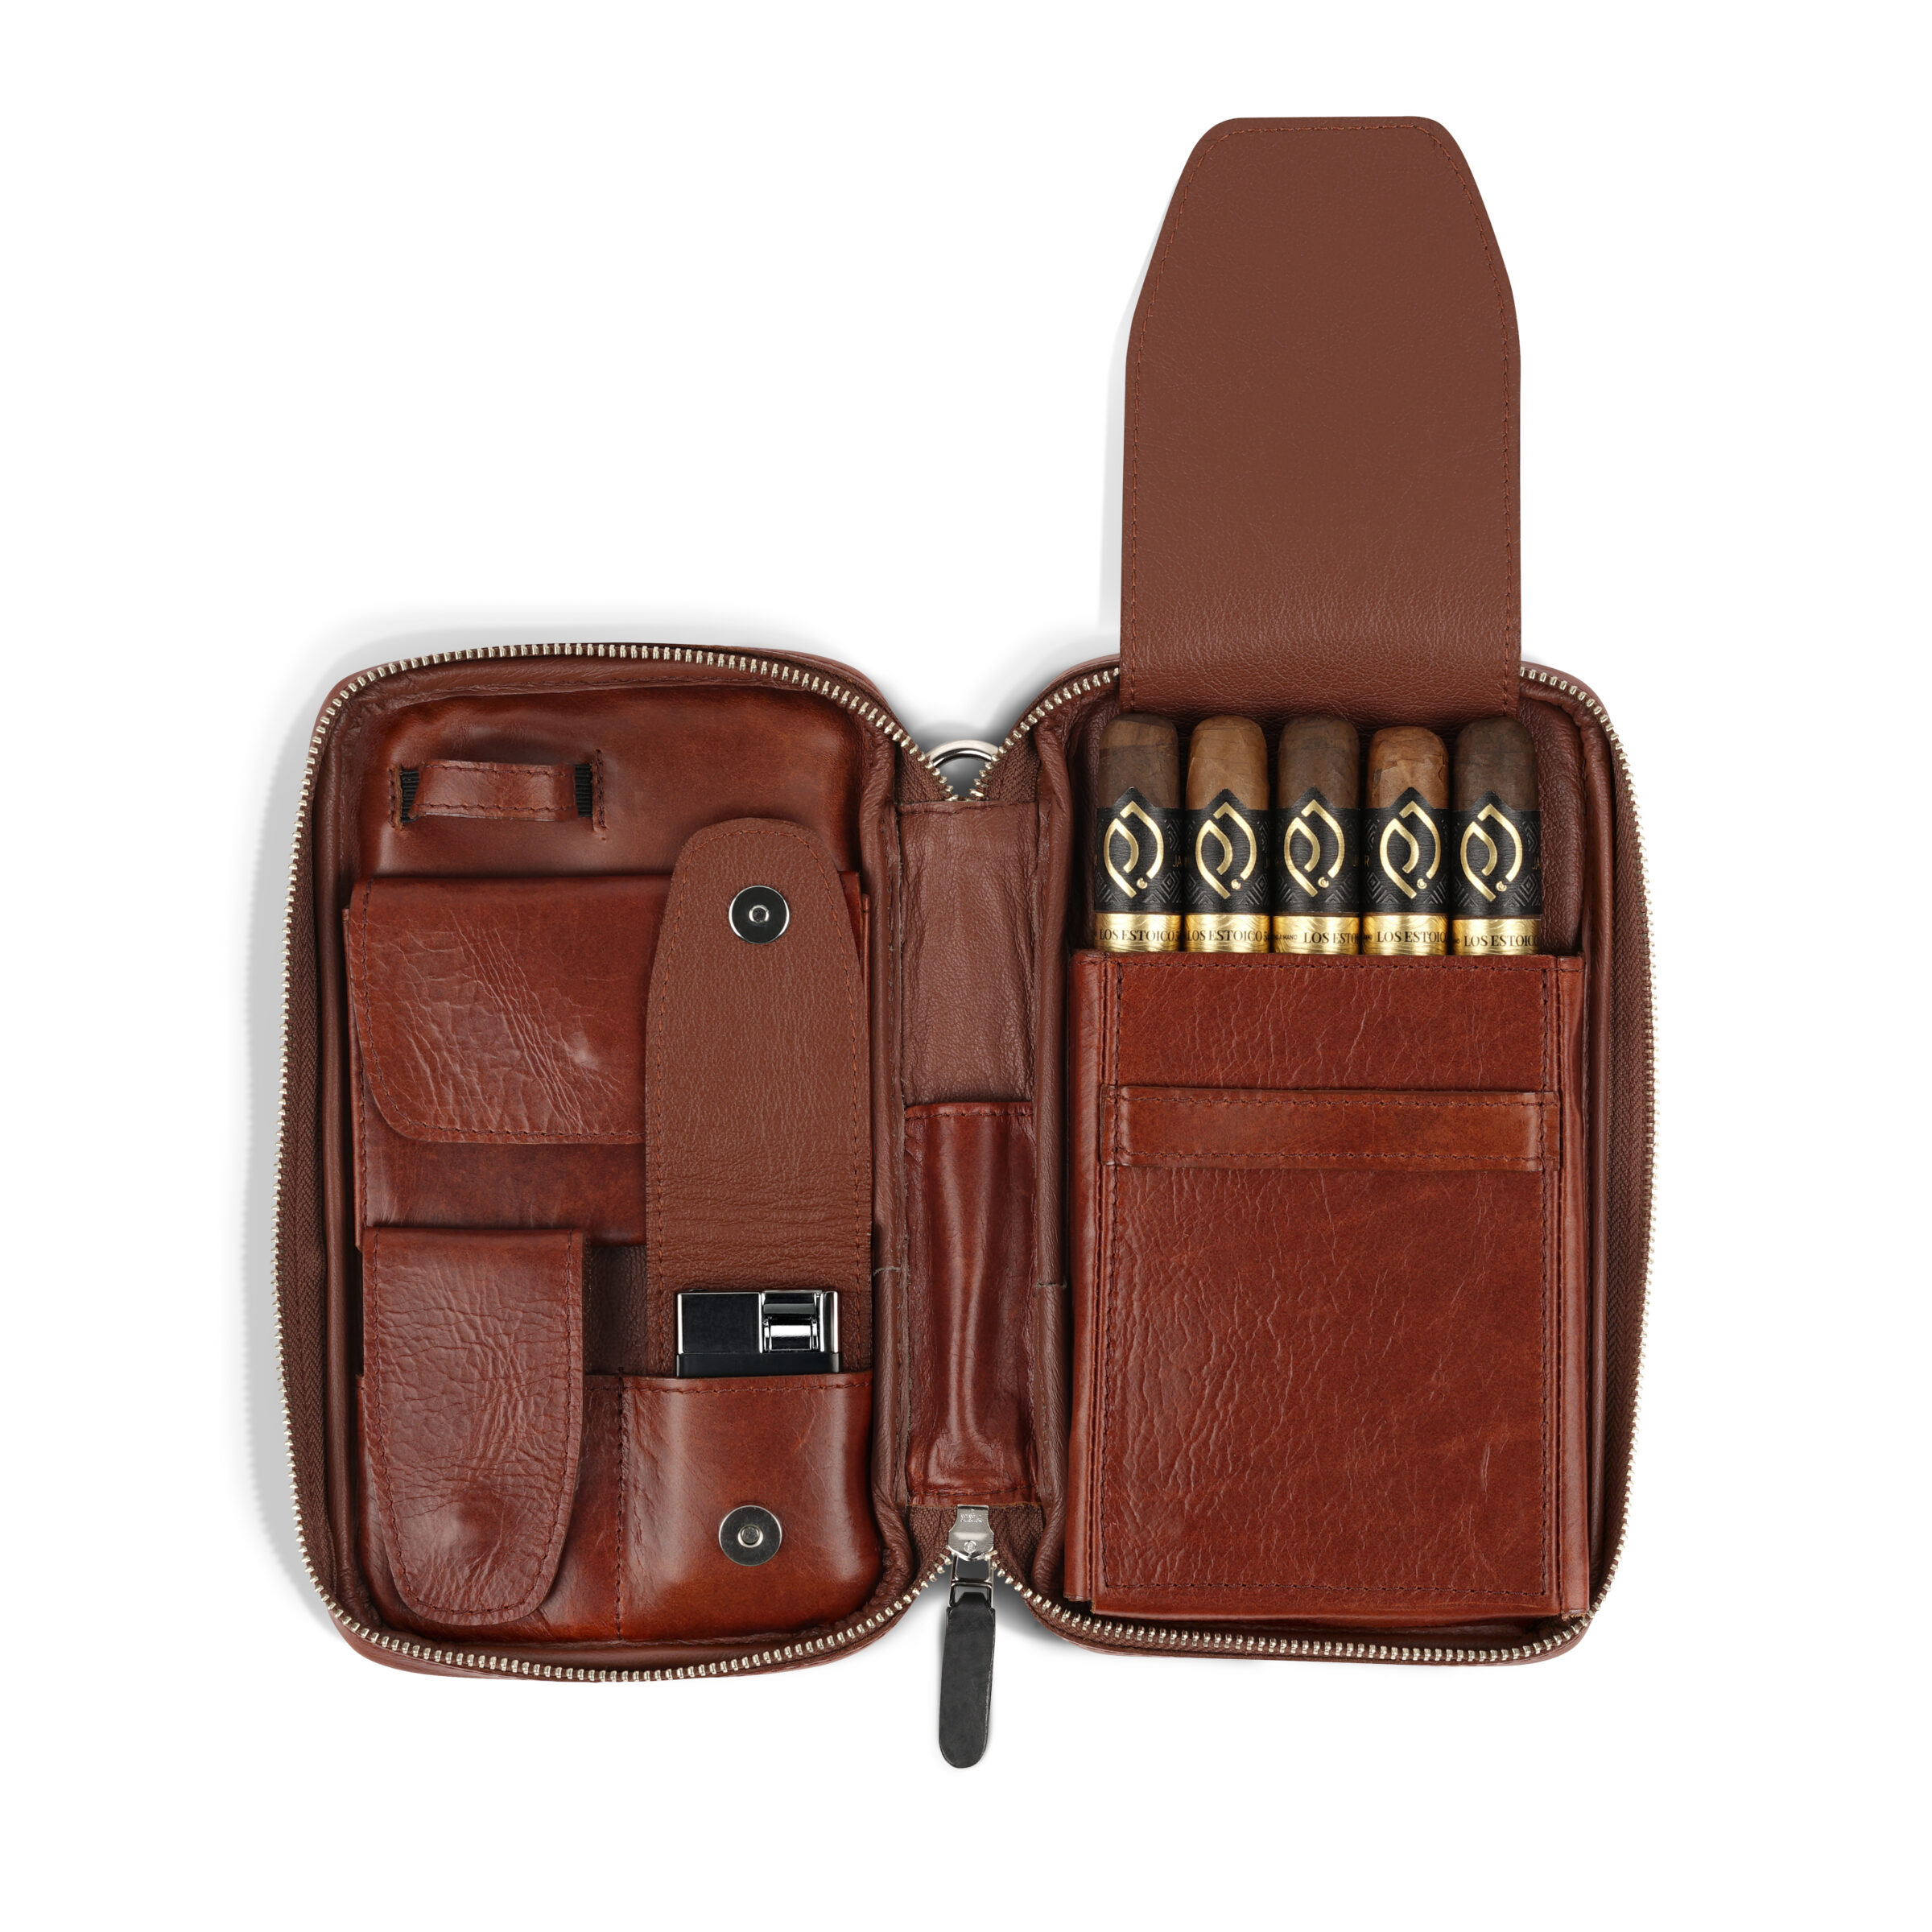 Leather Cigar Case Guide